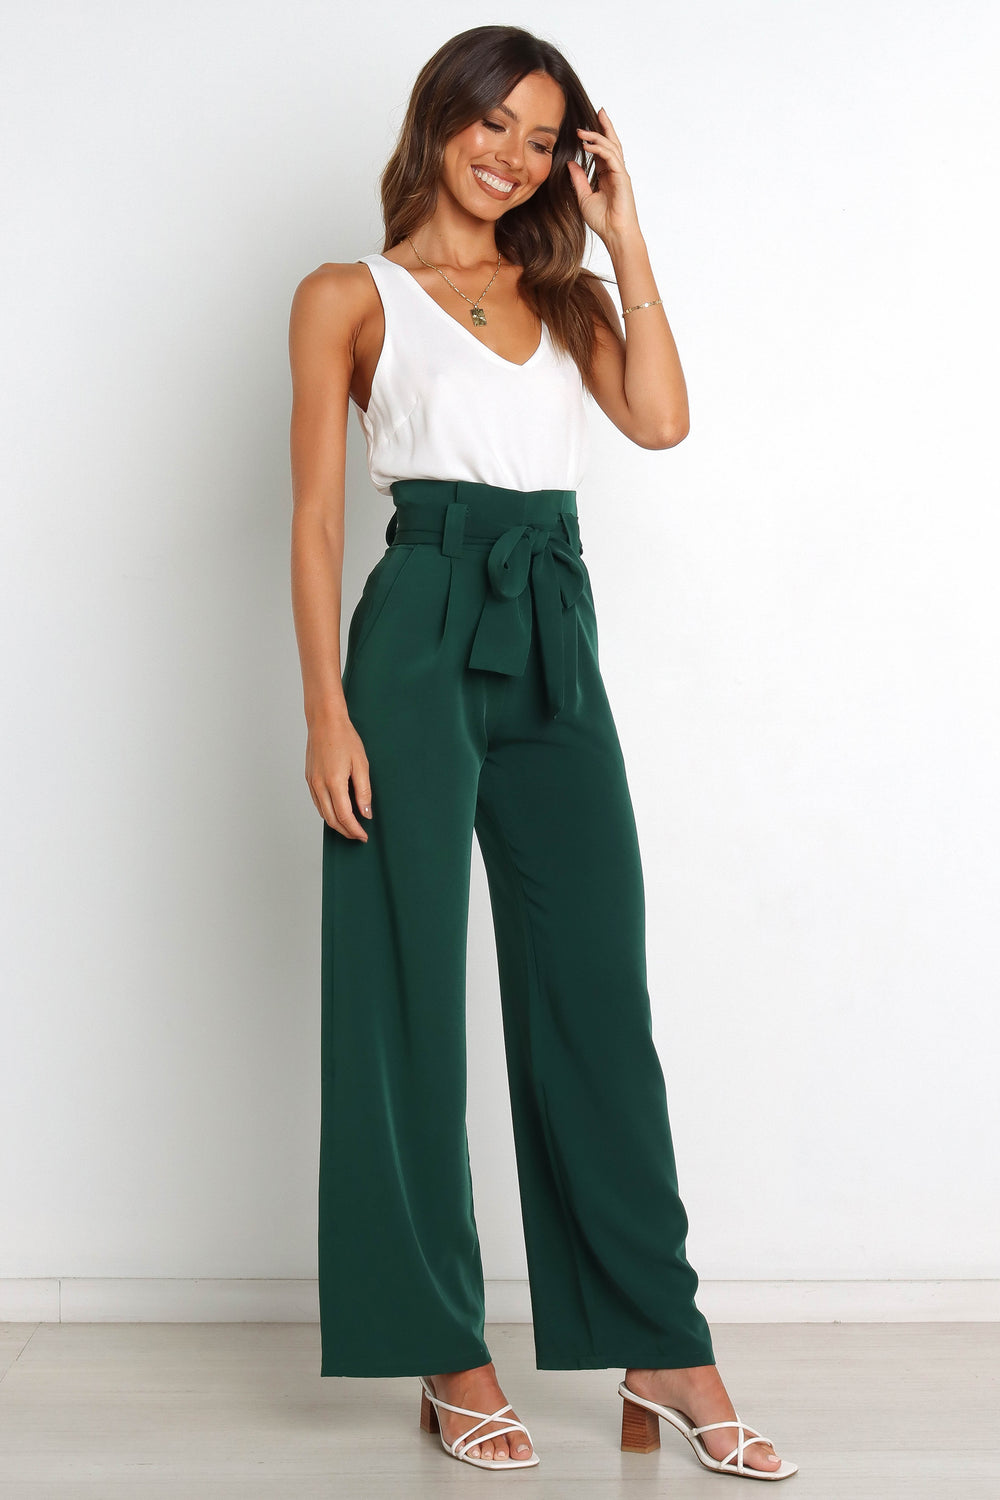 Sydne Style shows how to wear colorful pants for summer office outfit ideas   Sydne Style